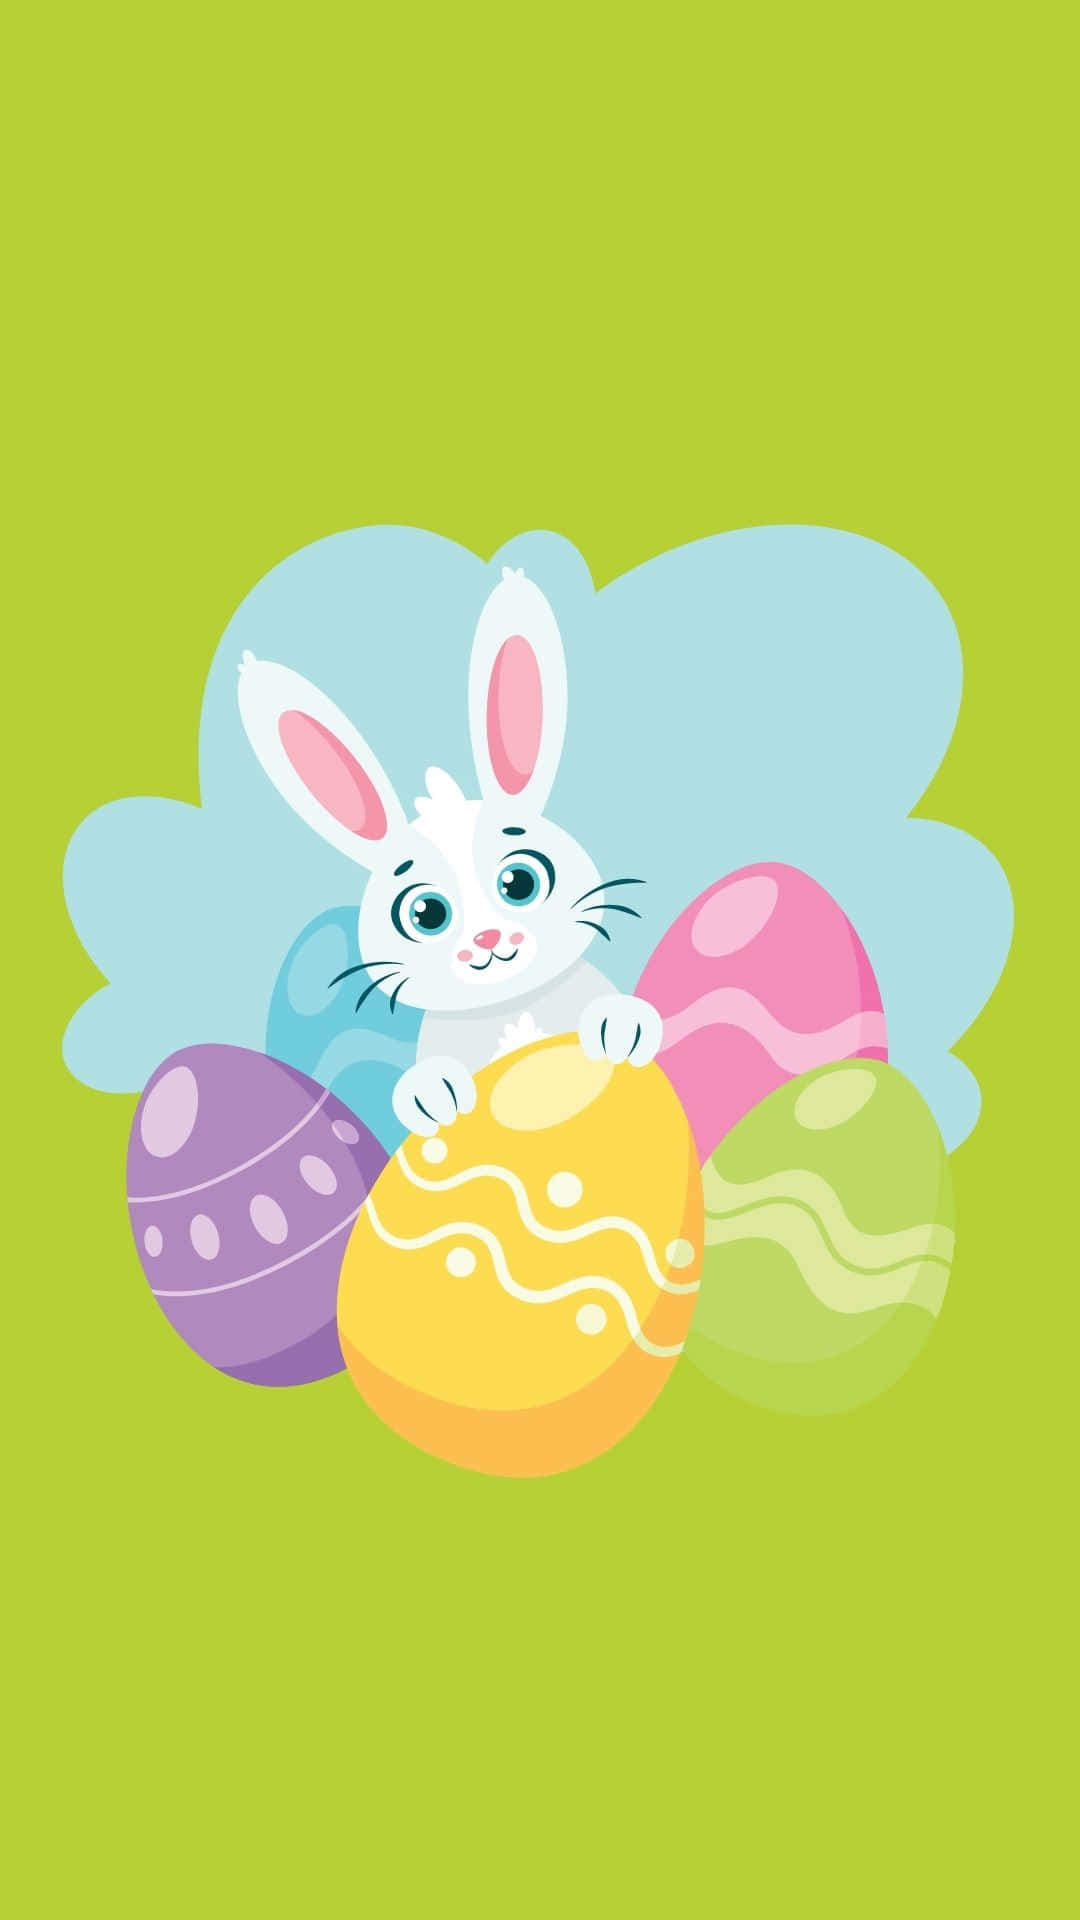 A White Bunny Is Sitting In A Group Of Colored Eggs Background